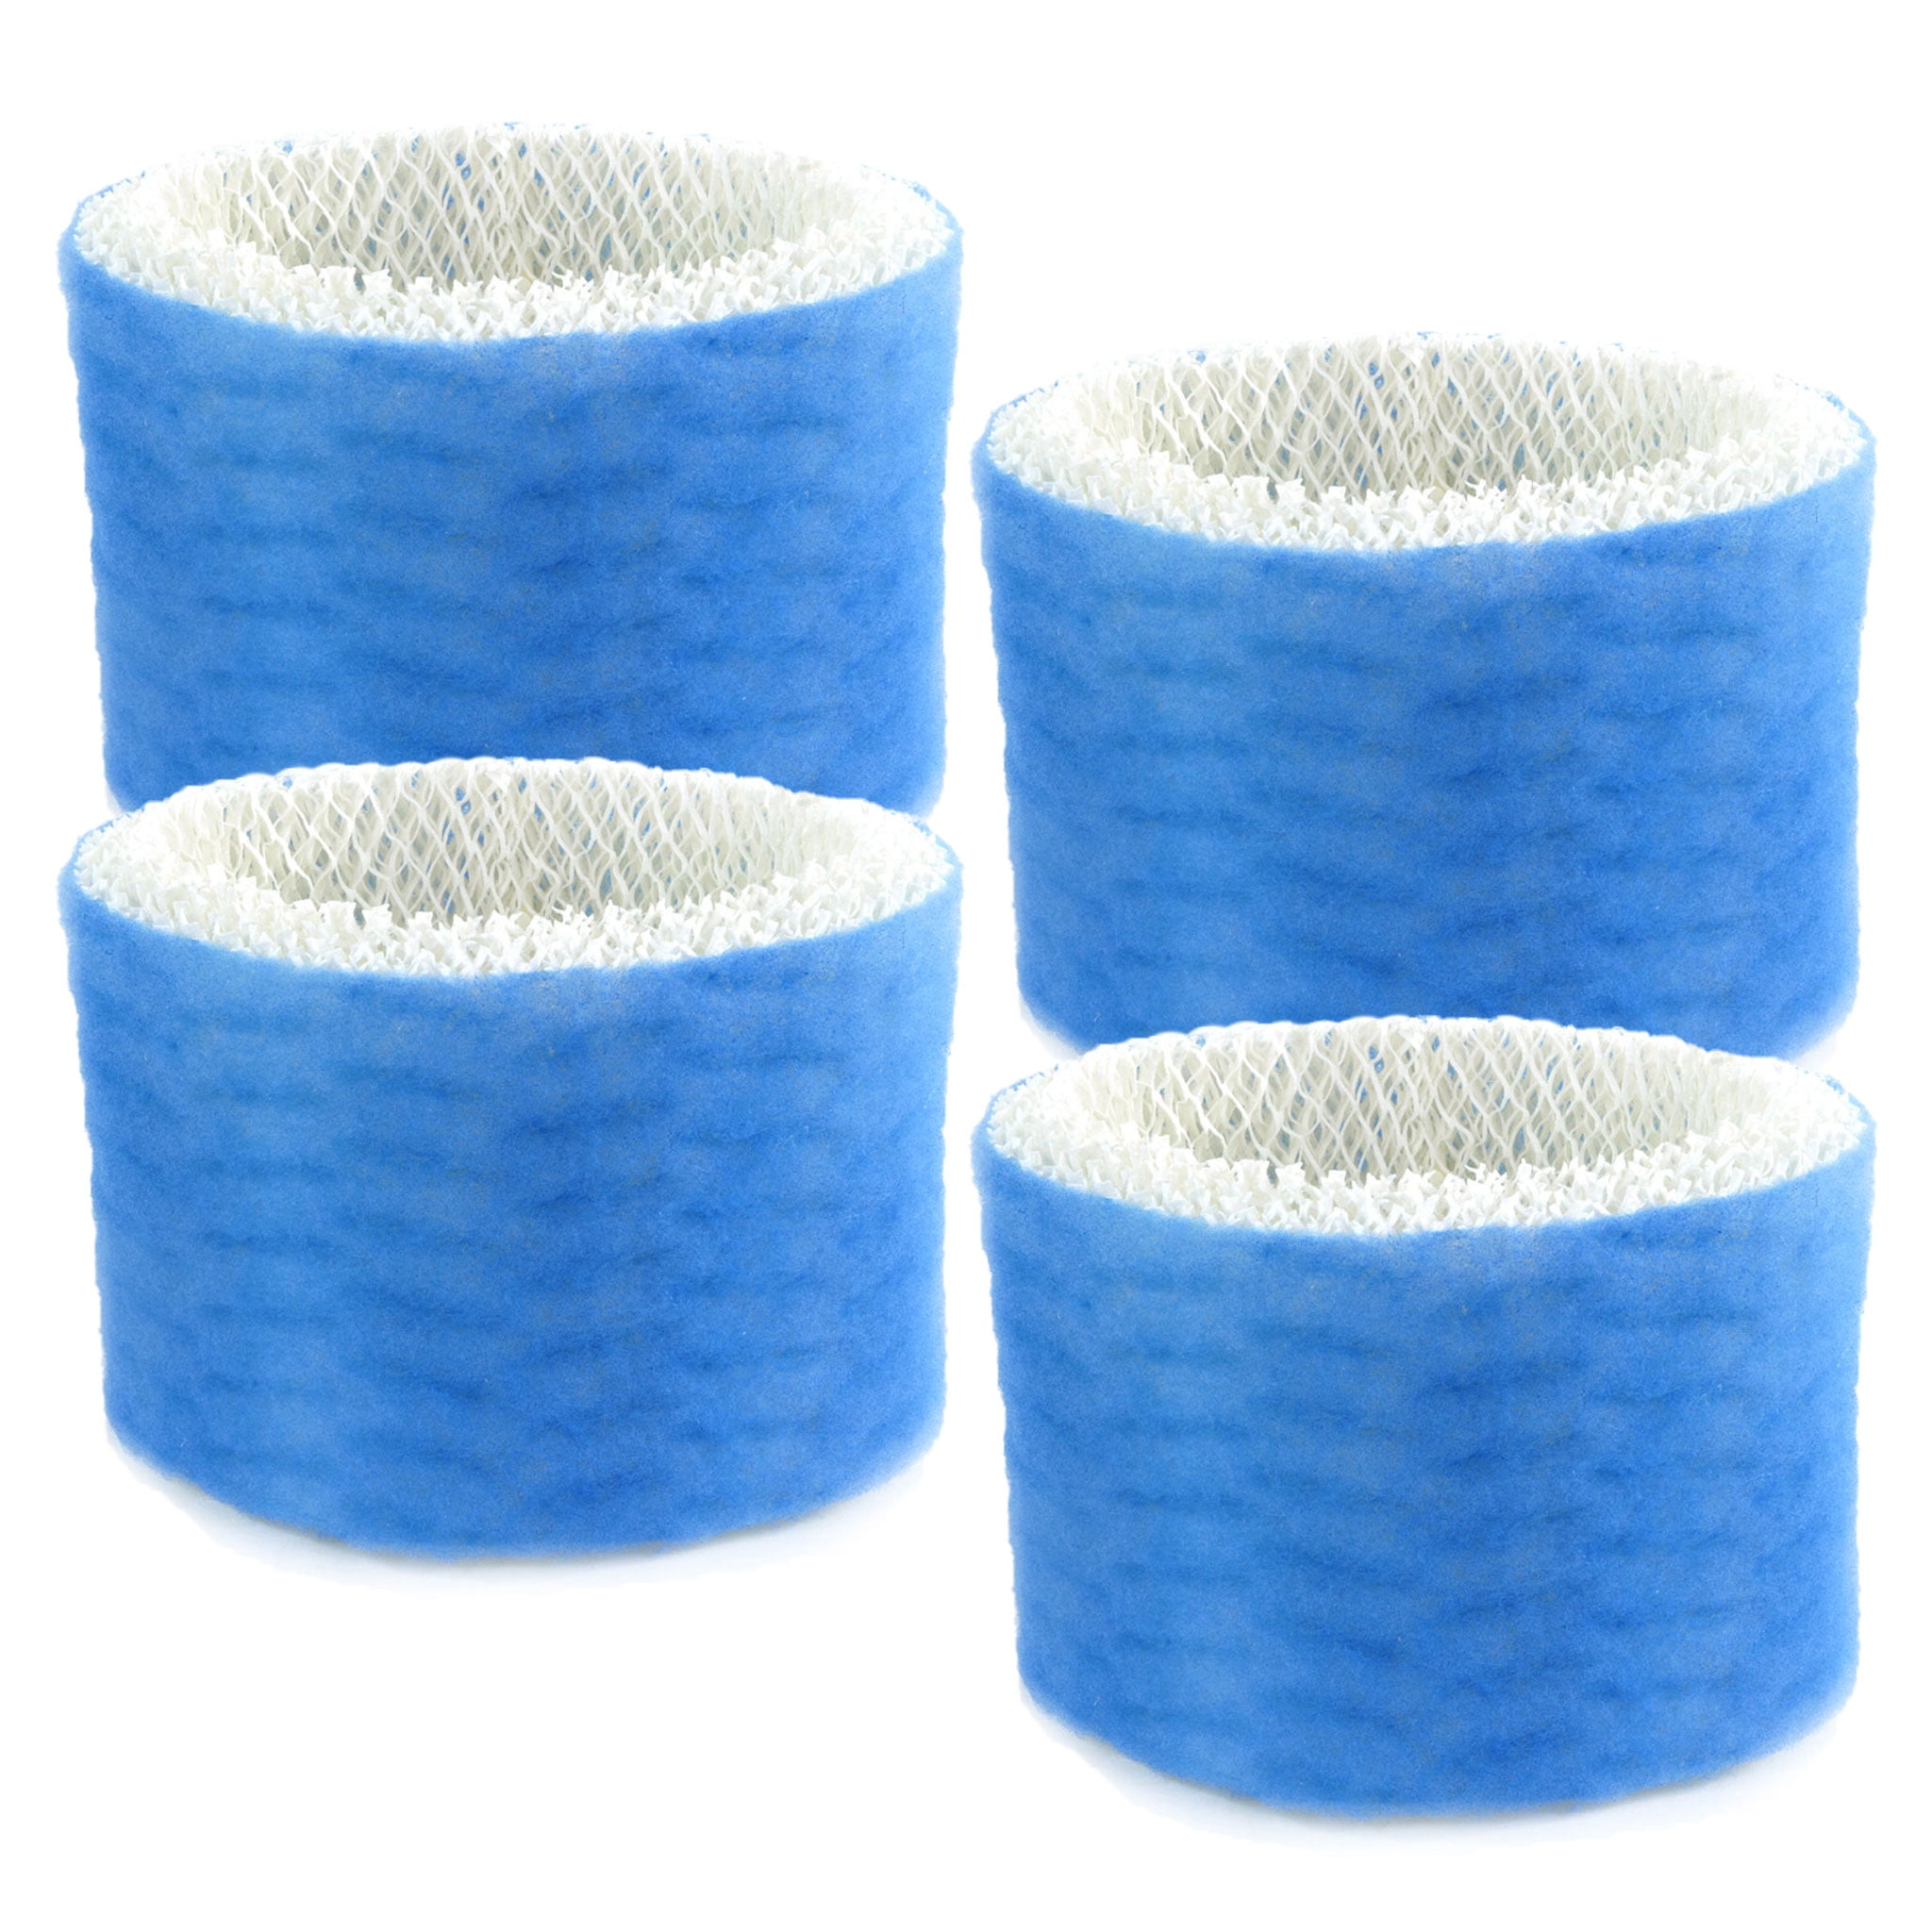 Replacement for Honeywell Humidifier HAC-504 HAC-504AW HAC504V1 HCM-350 HCM-300T HCM-600 HCM-710 HCM-315T Filter A PIGUOAT 4 Pack Humidifier Filters 